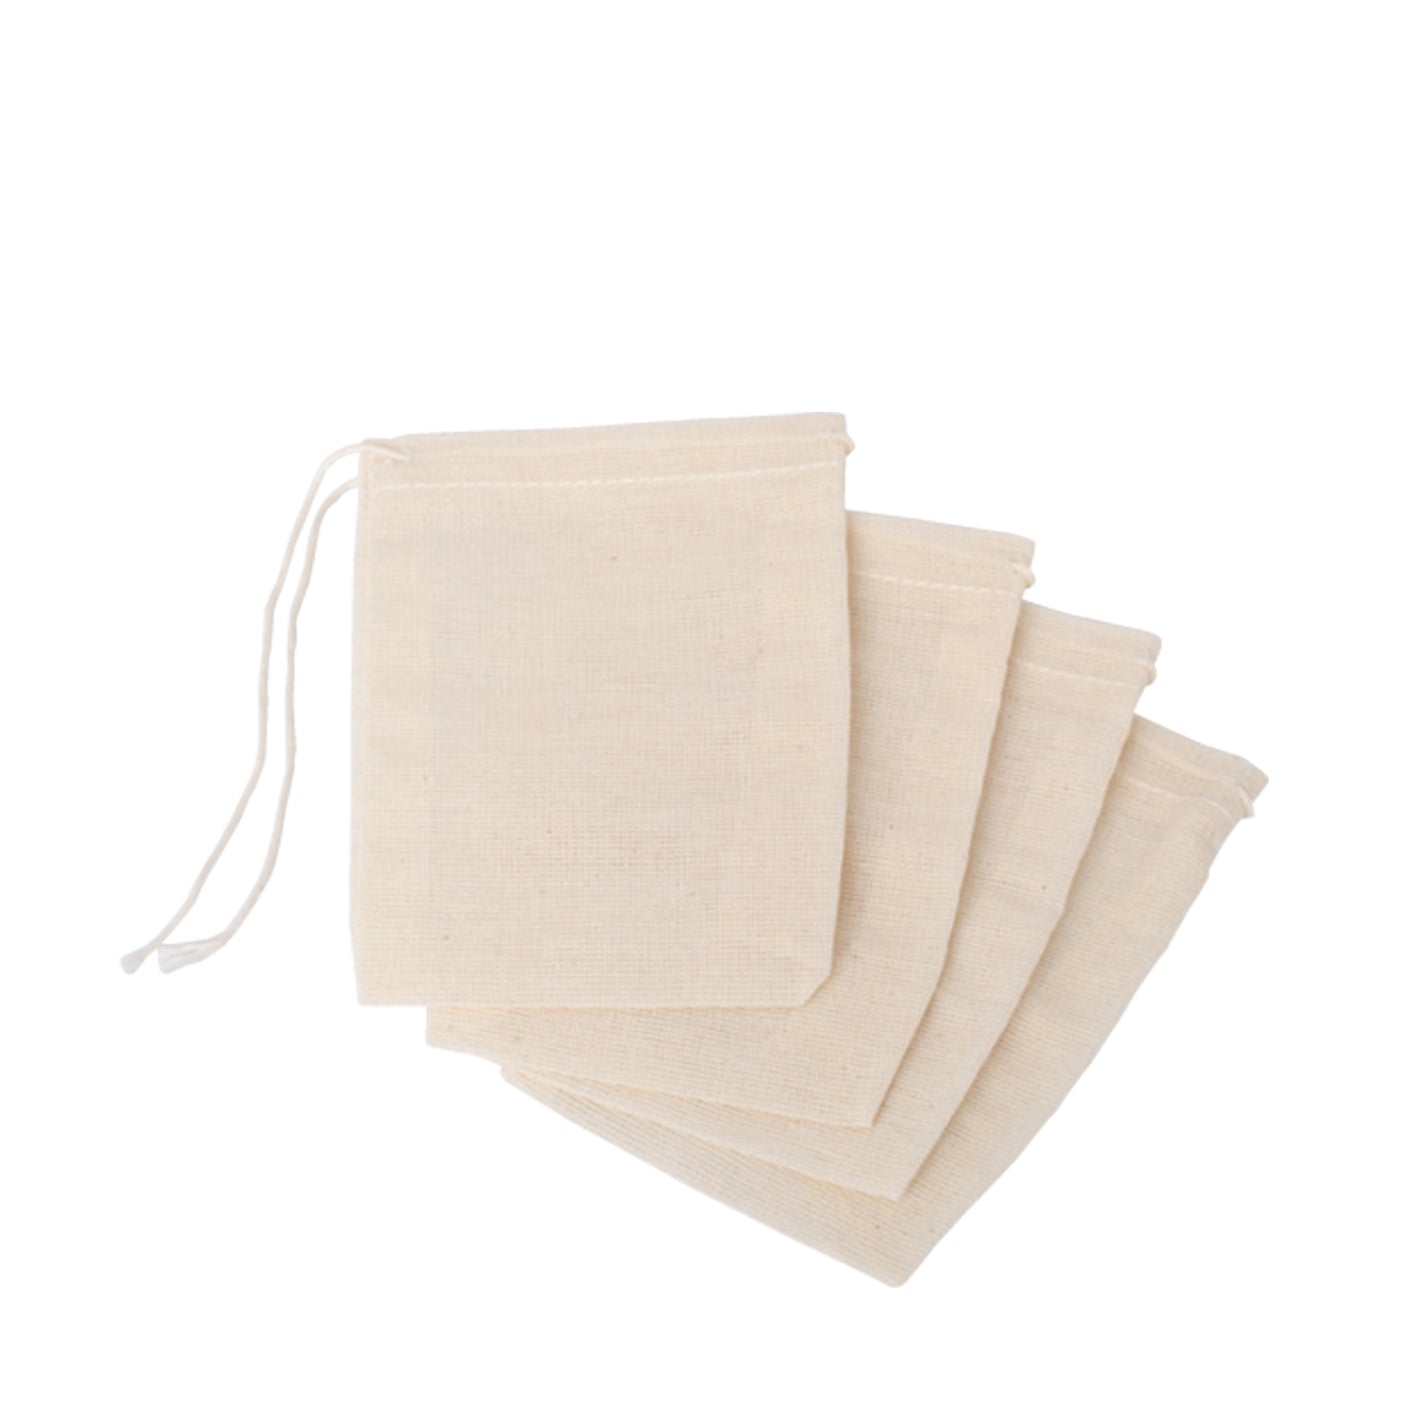 Redecker Spice Bags - pack of 4